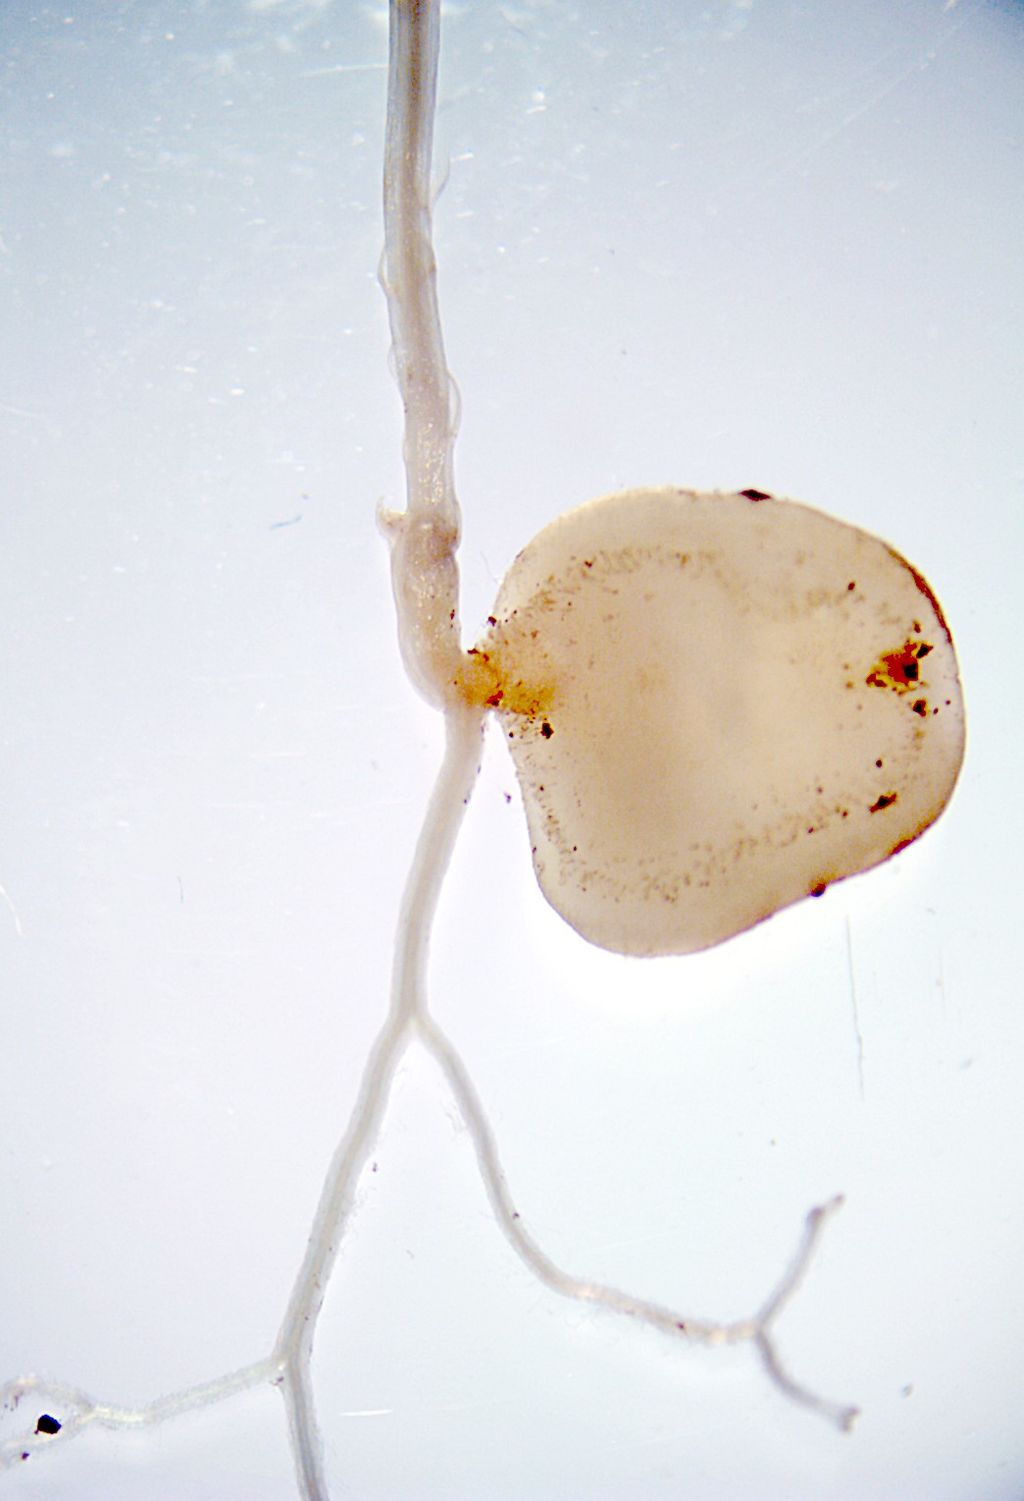 A pale, flat gametophyte thallus has an emerging sporophyte